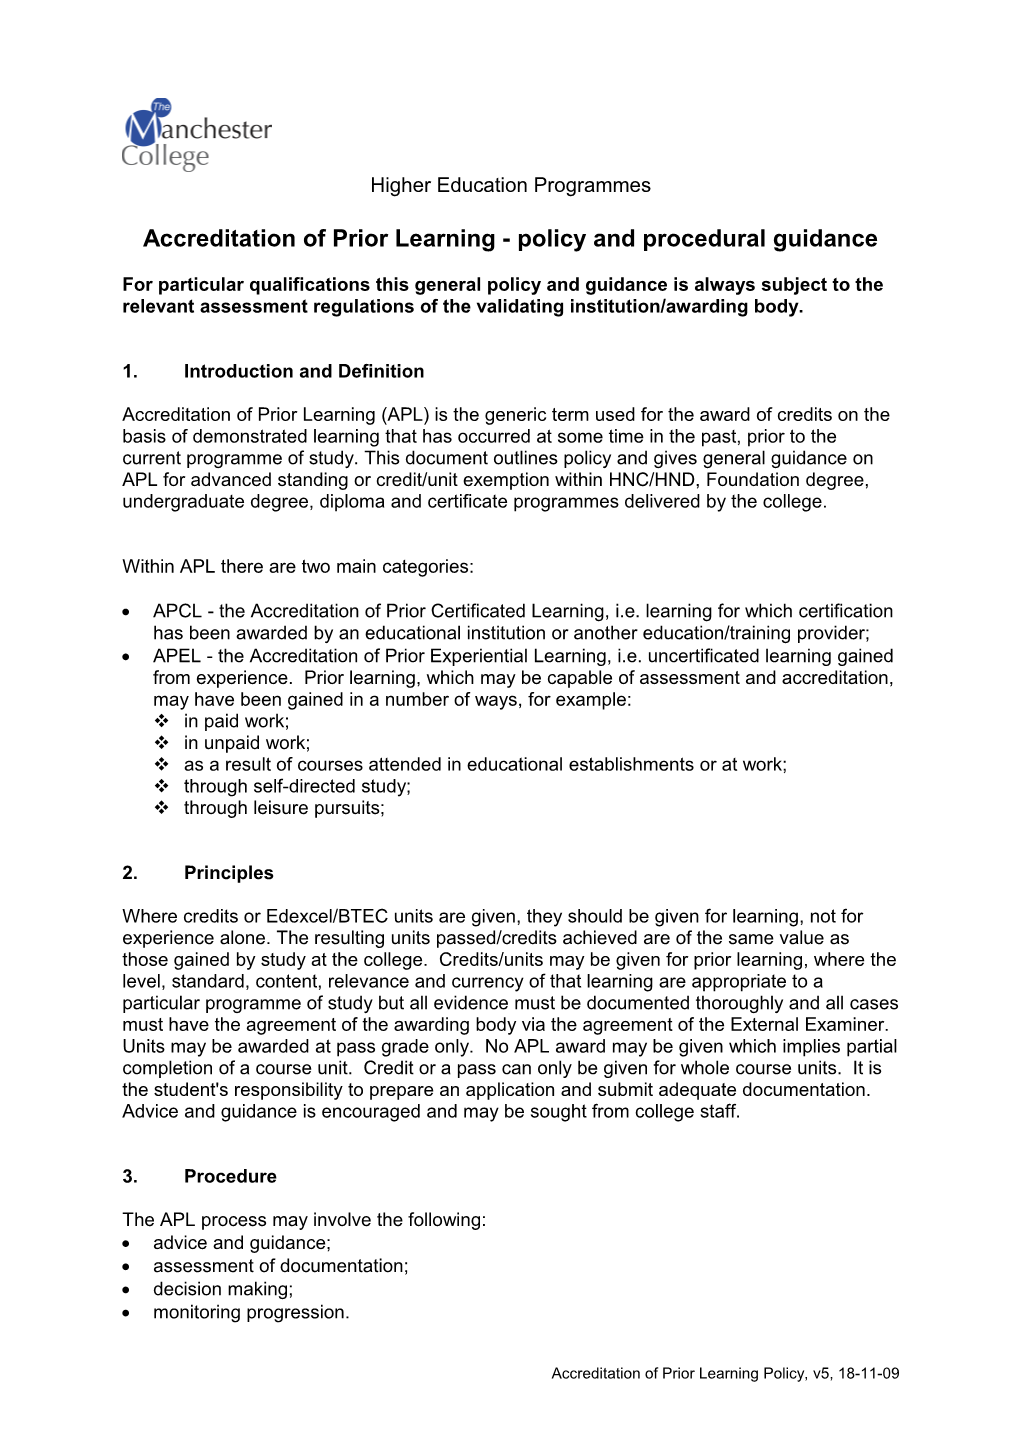 Accreditation of Prior Learning